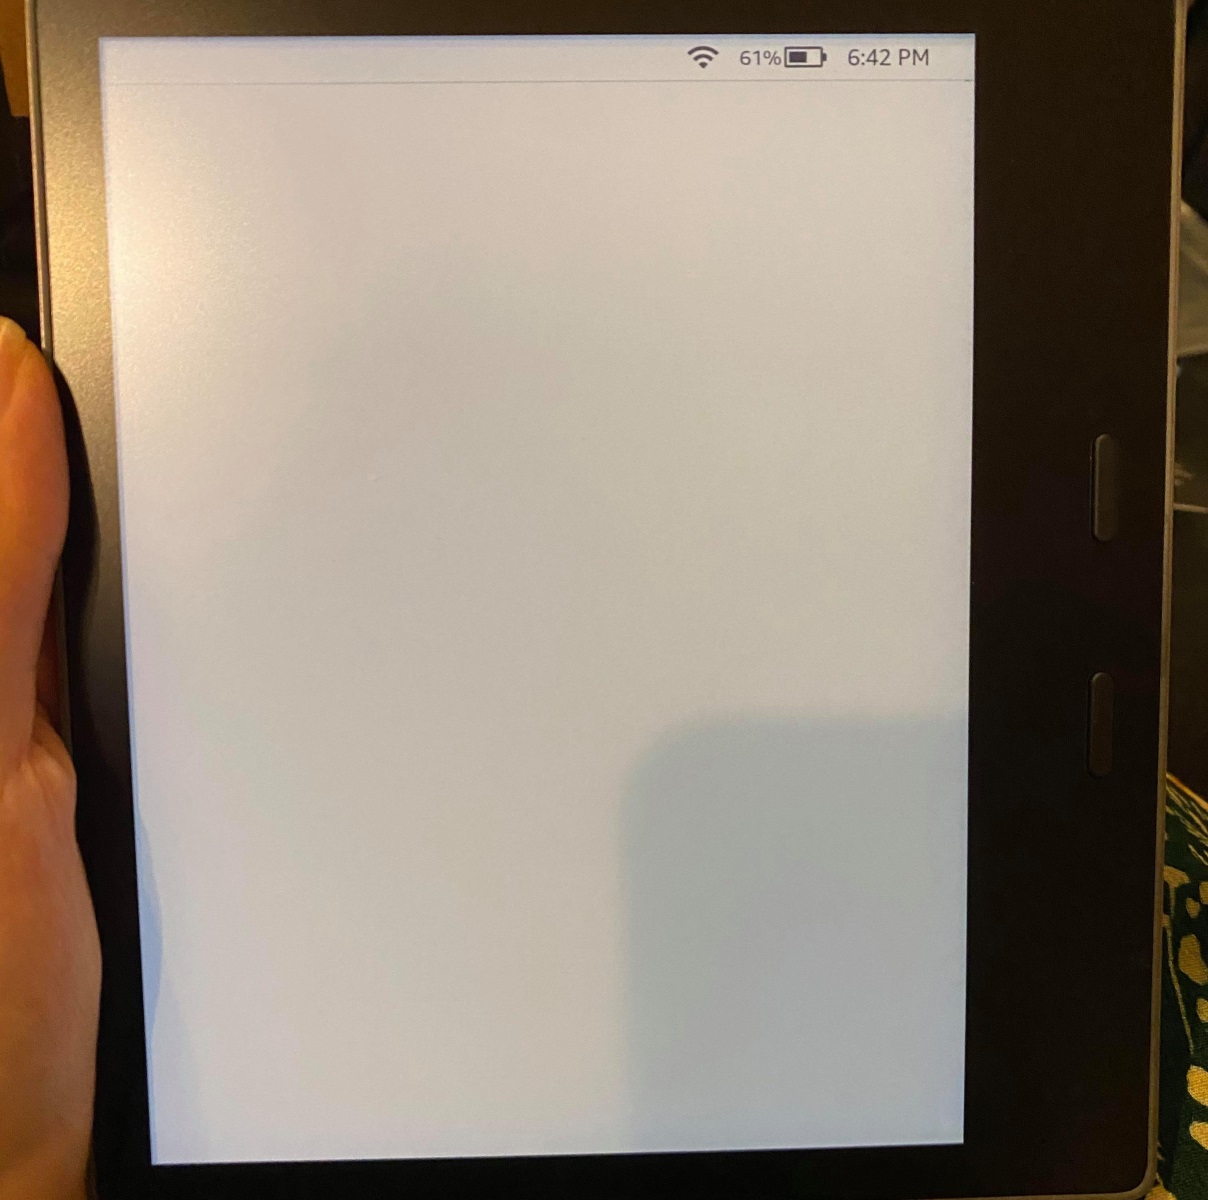 Why Is My Kindle Screen White